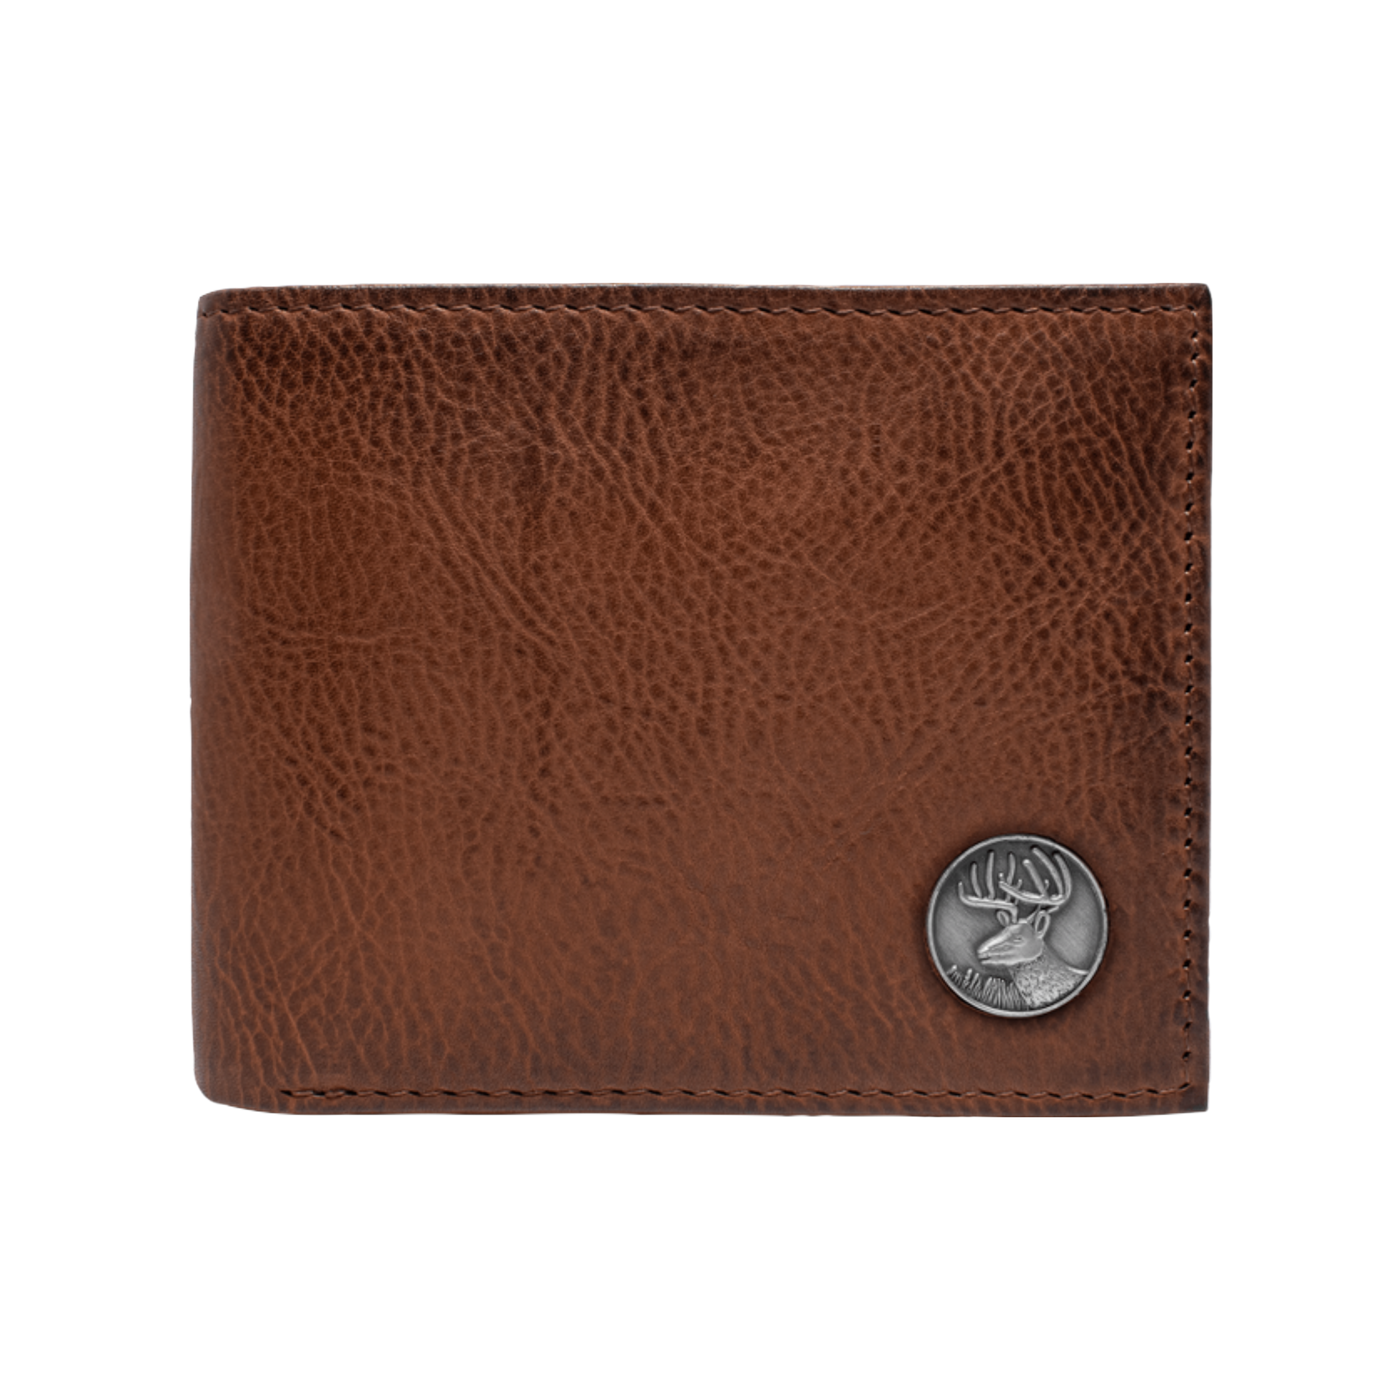 Our Wildlife Bifold Buck Wallet is the perfect piece for any collection, containing a beautiful hand-burnished finish and rich full grain leather, this piece doesn't disappoint. 8 Card Slots 3 Storage Pockets 2 ID Windows Leather Tipped Bill Compartment Weber's Signature Buck Concho Dimensions: 4.5"L x 3.5"H RFID Protection Color: Caramel